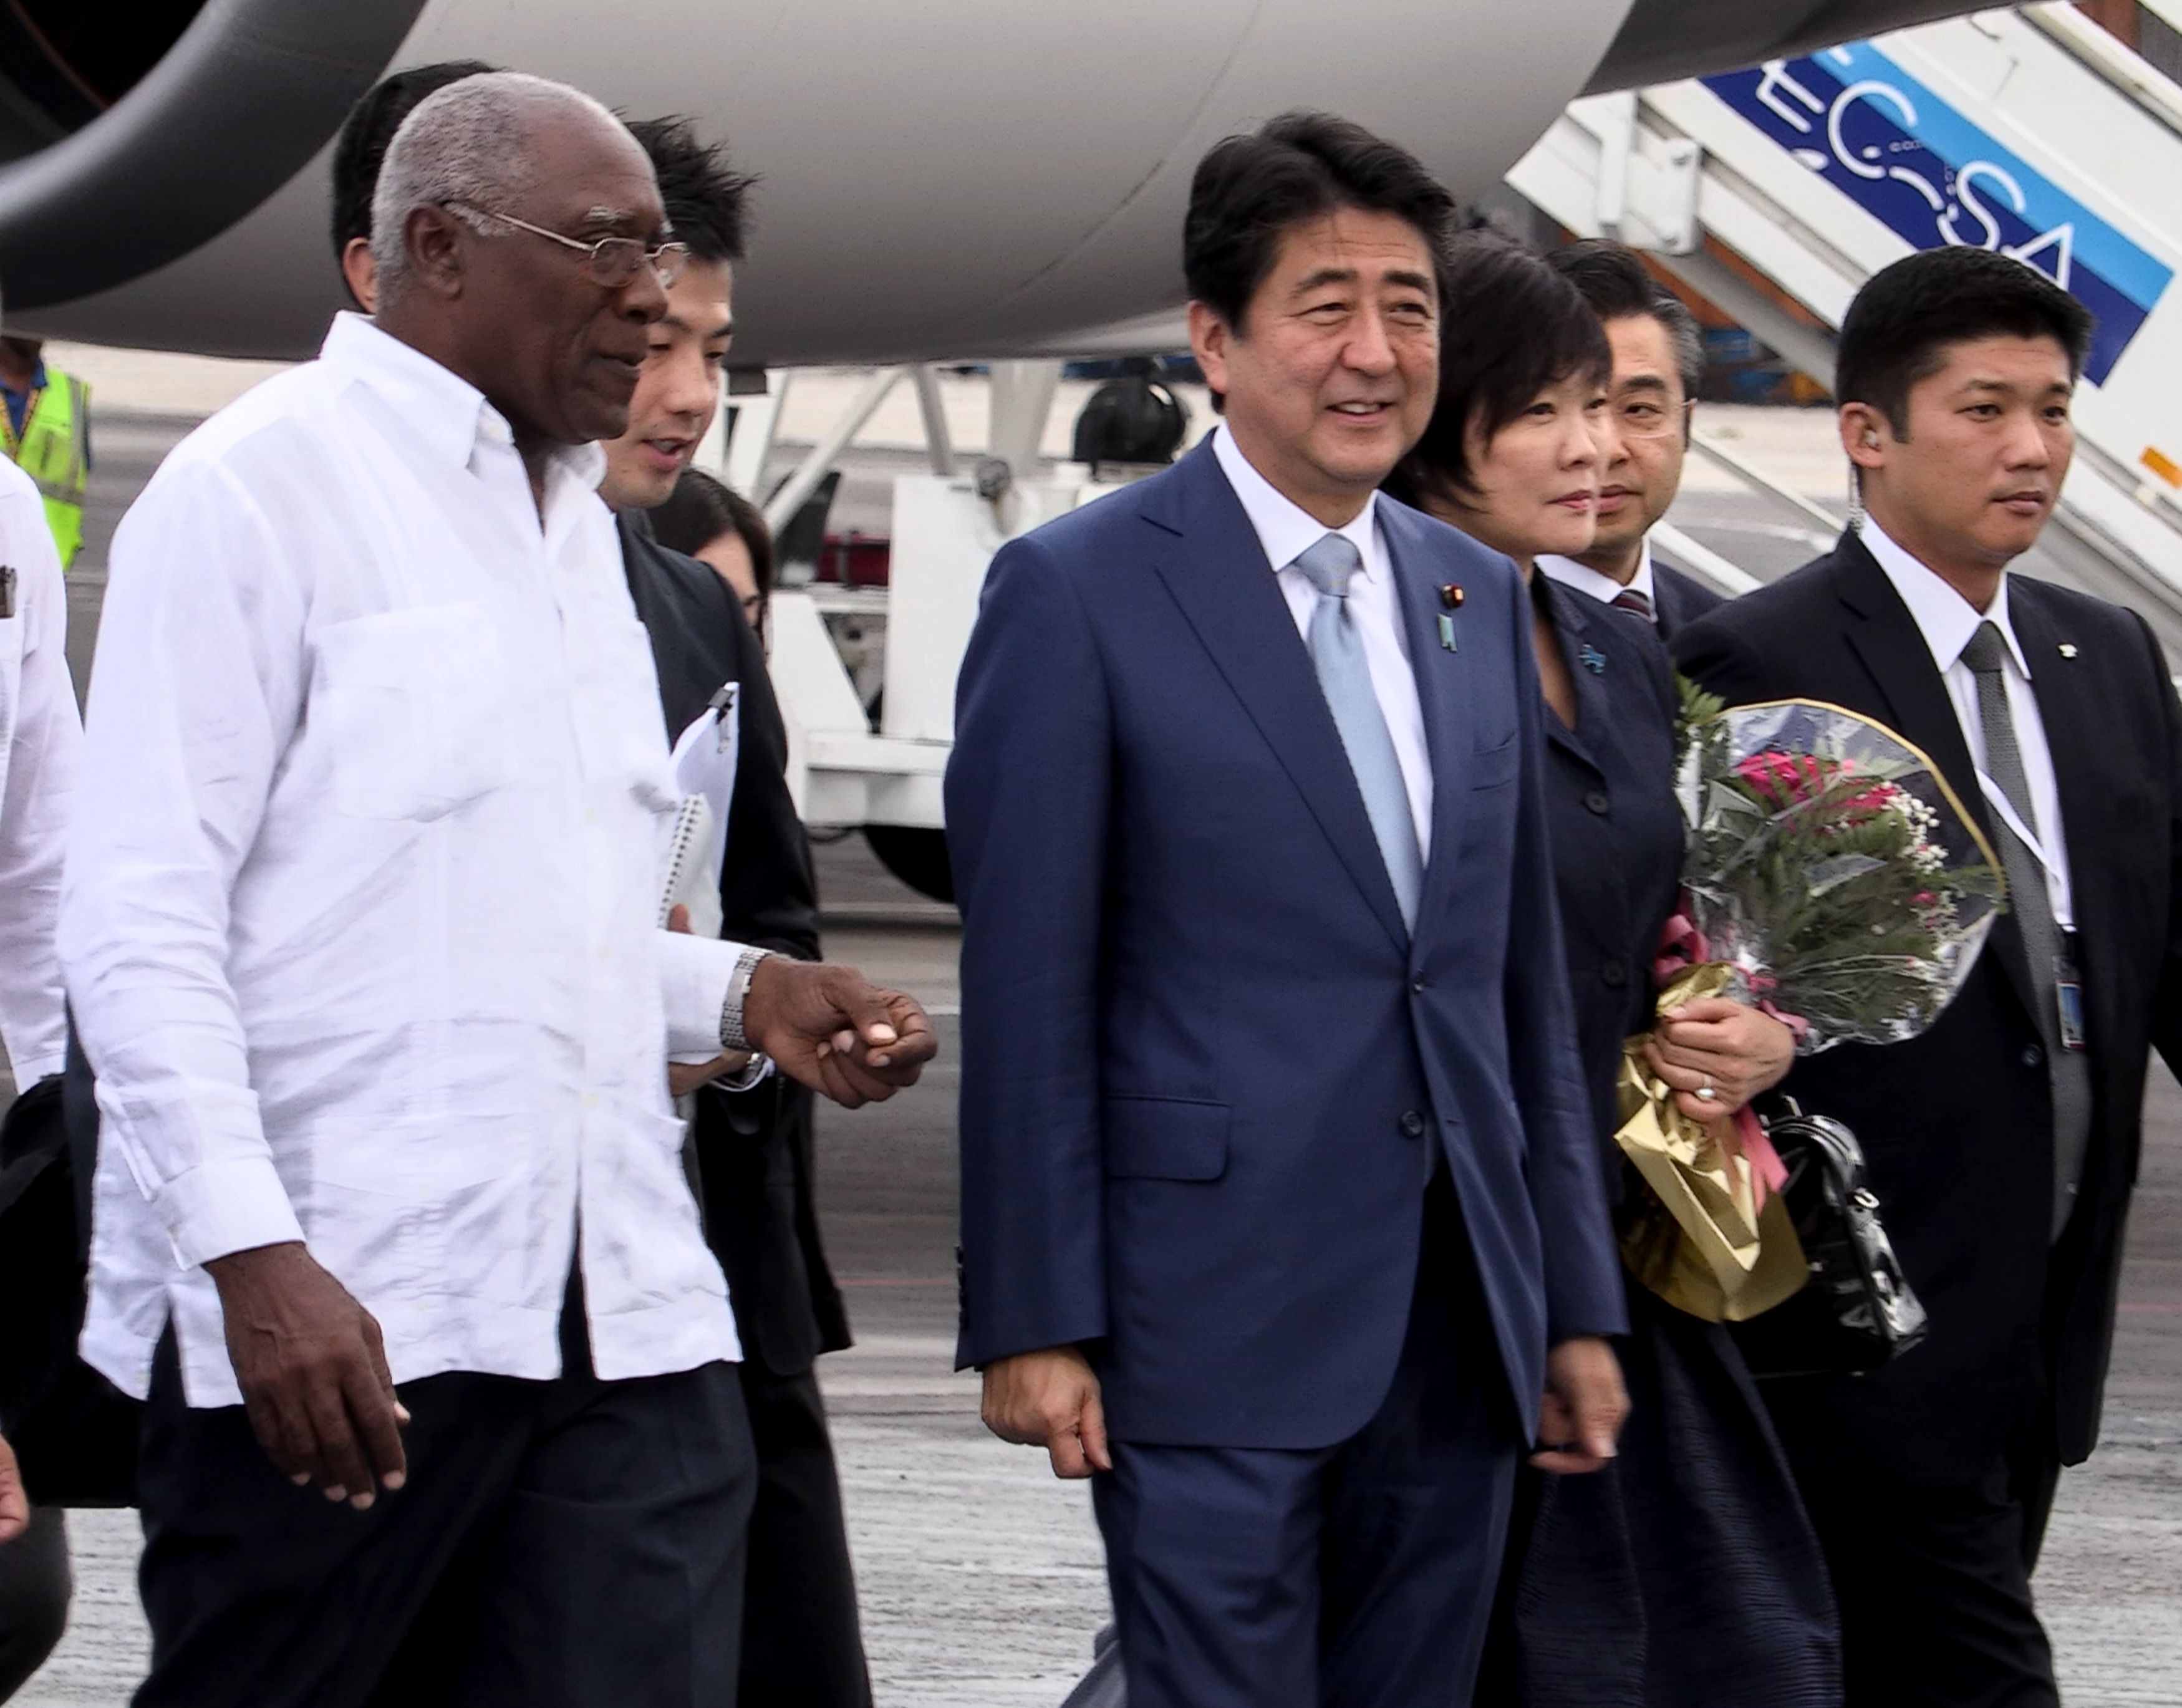 Prime Minister Shinzo Abe (center) is welcomed by Cuban Vice President Salvador Valdes Mesa (left) at the Jose Marti International airport in Havana on Thursday. Abe is in Cuba in a two-day official visit. | AFP-JIJI